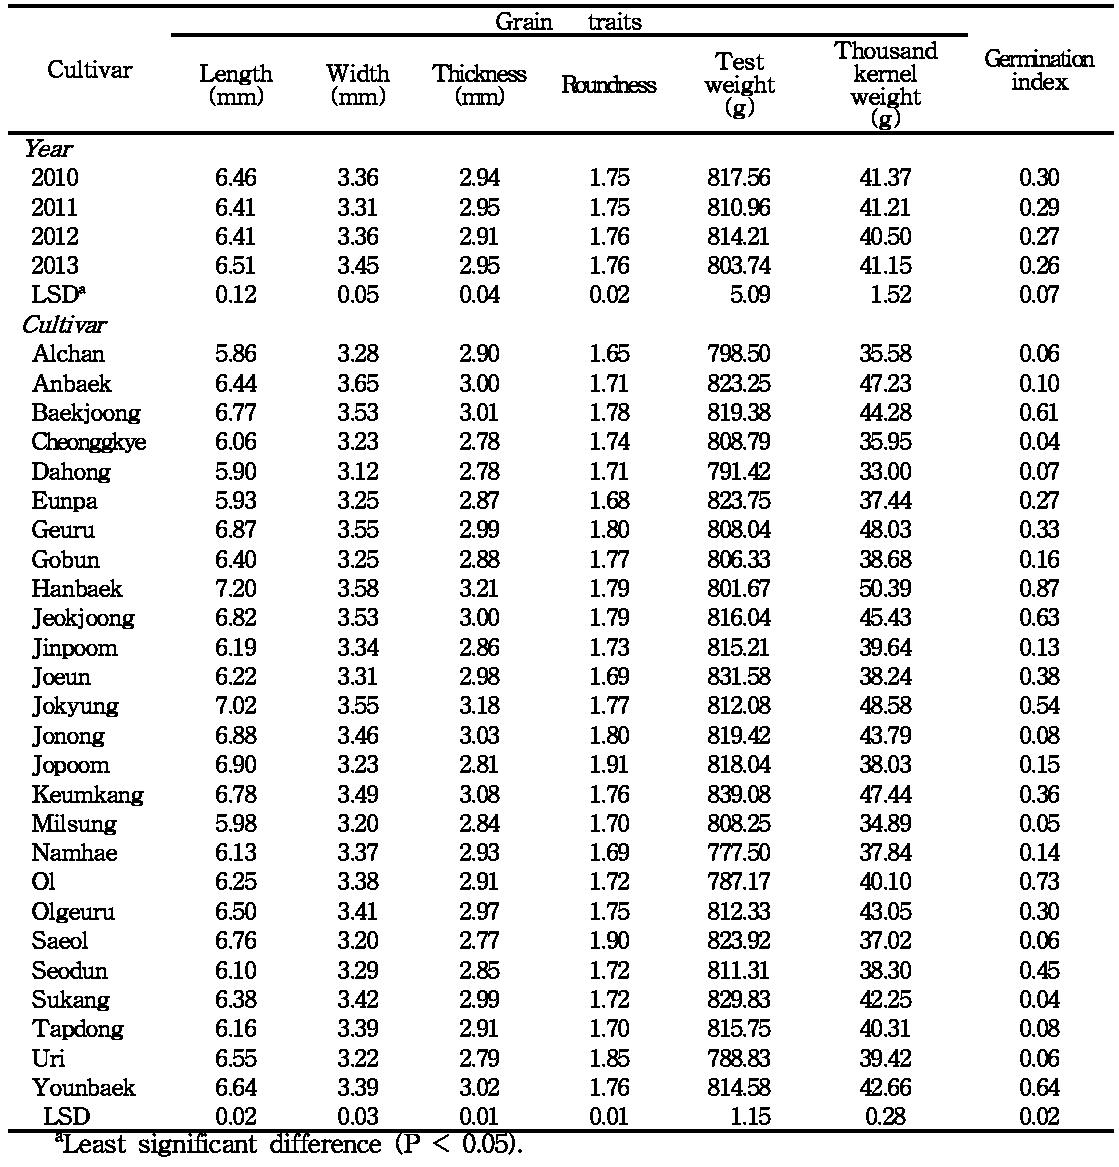 Means for grain traits and germination index of 26 Korean wheat cultivars grown in four crop years